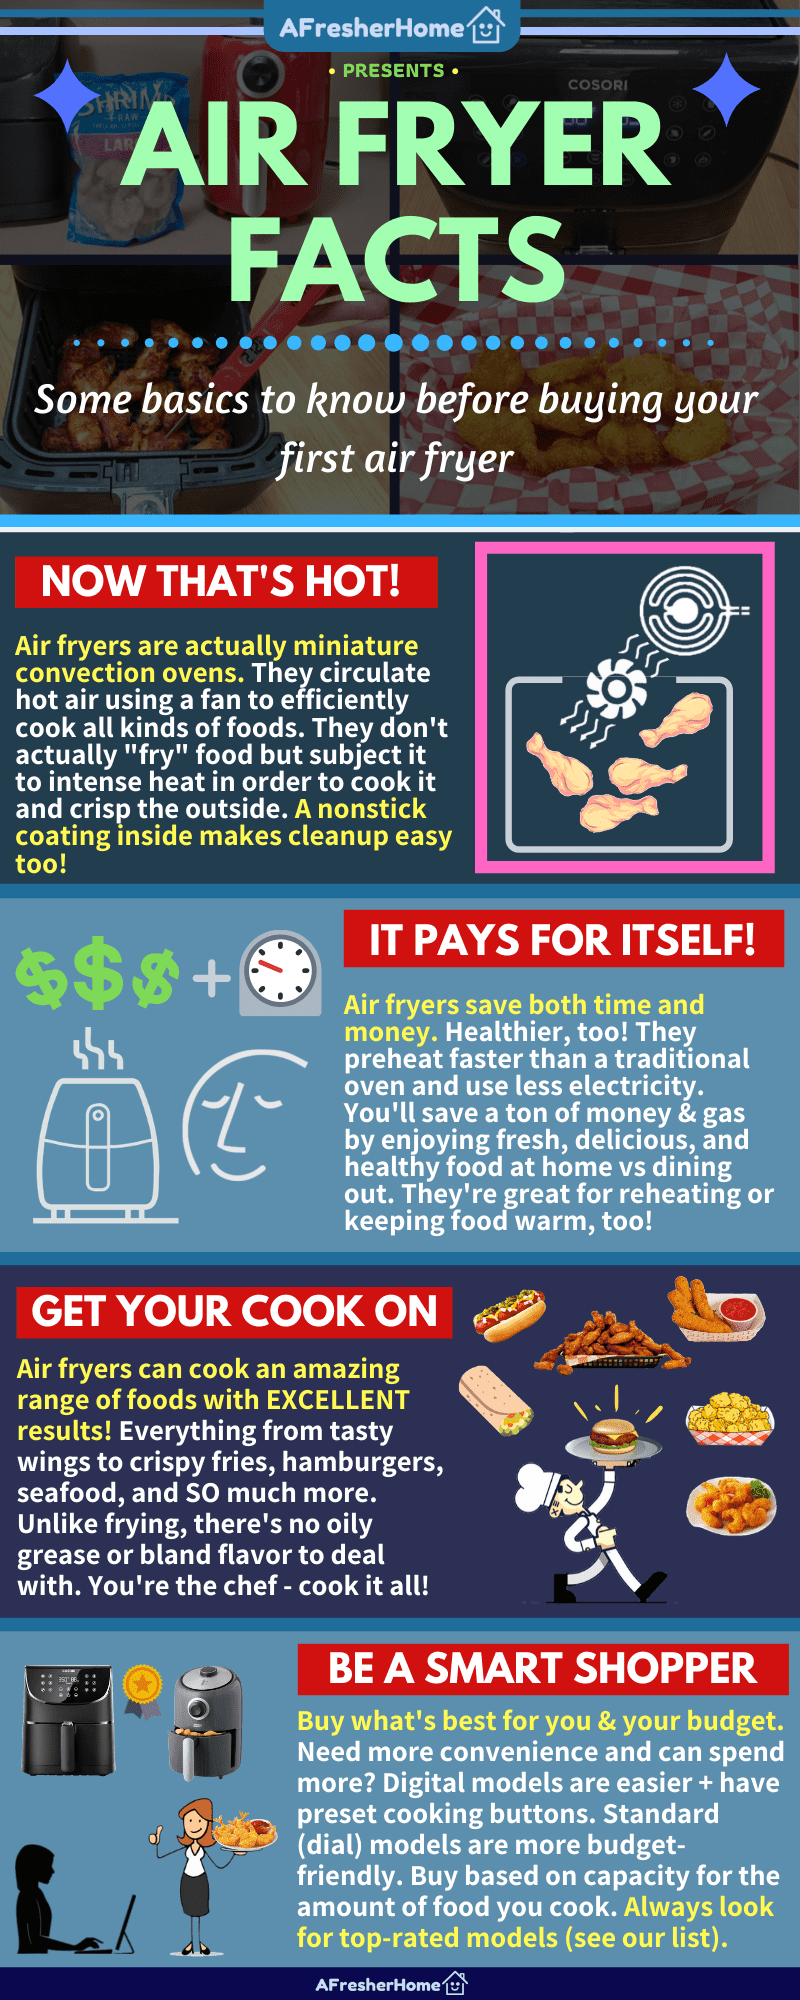 Air fryer basics infographic guide